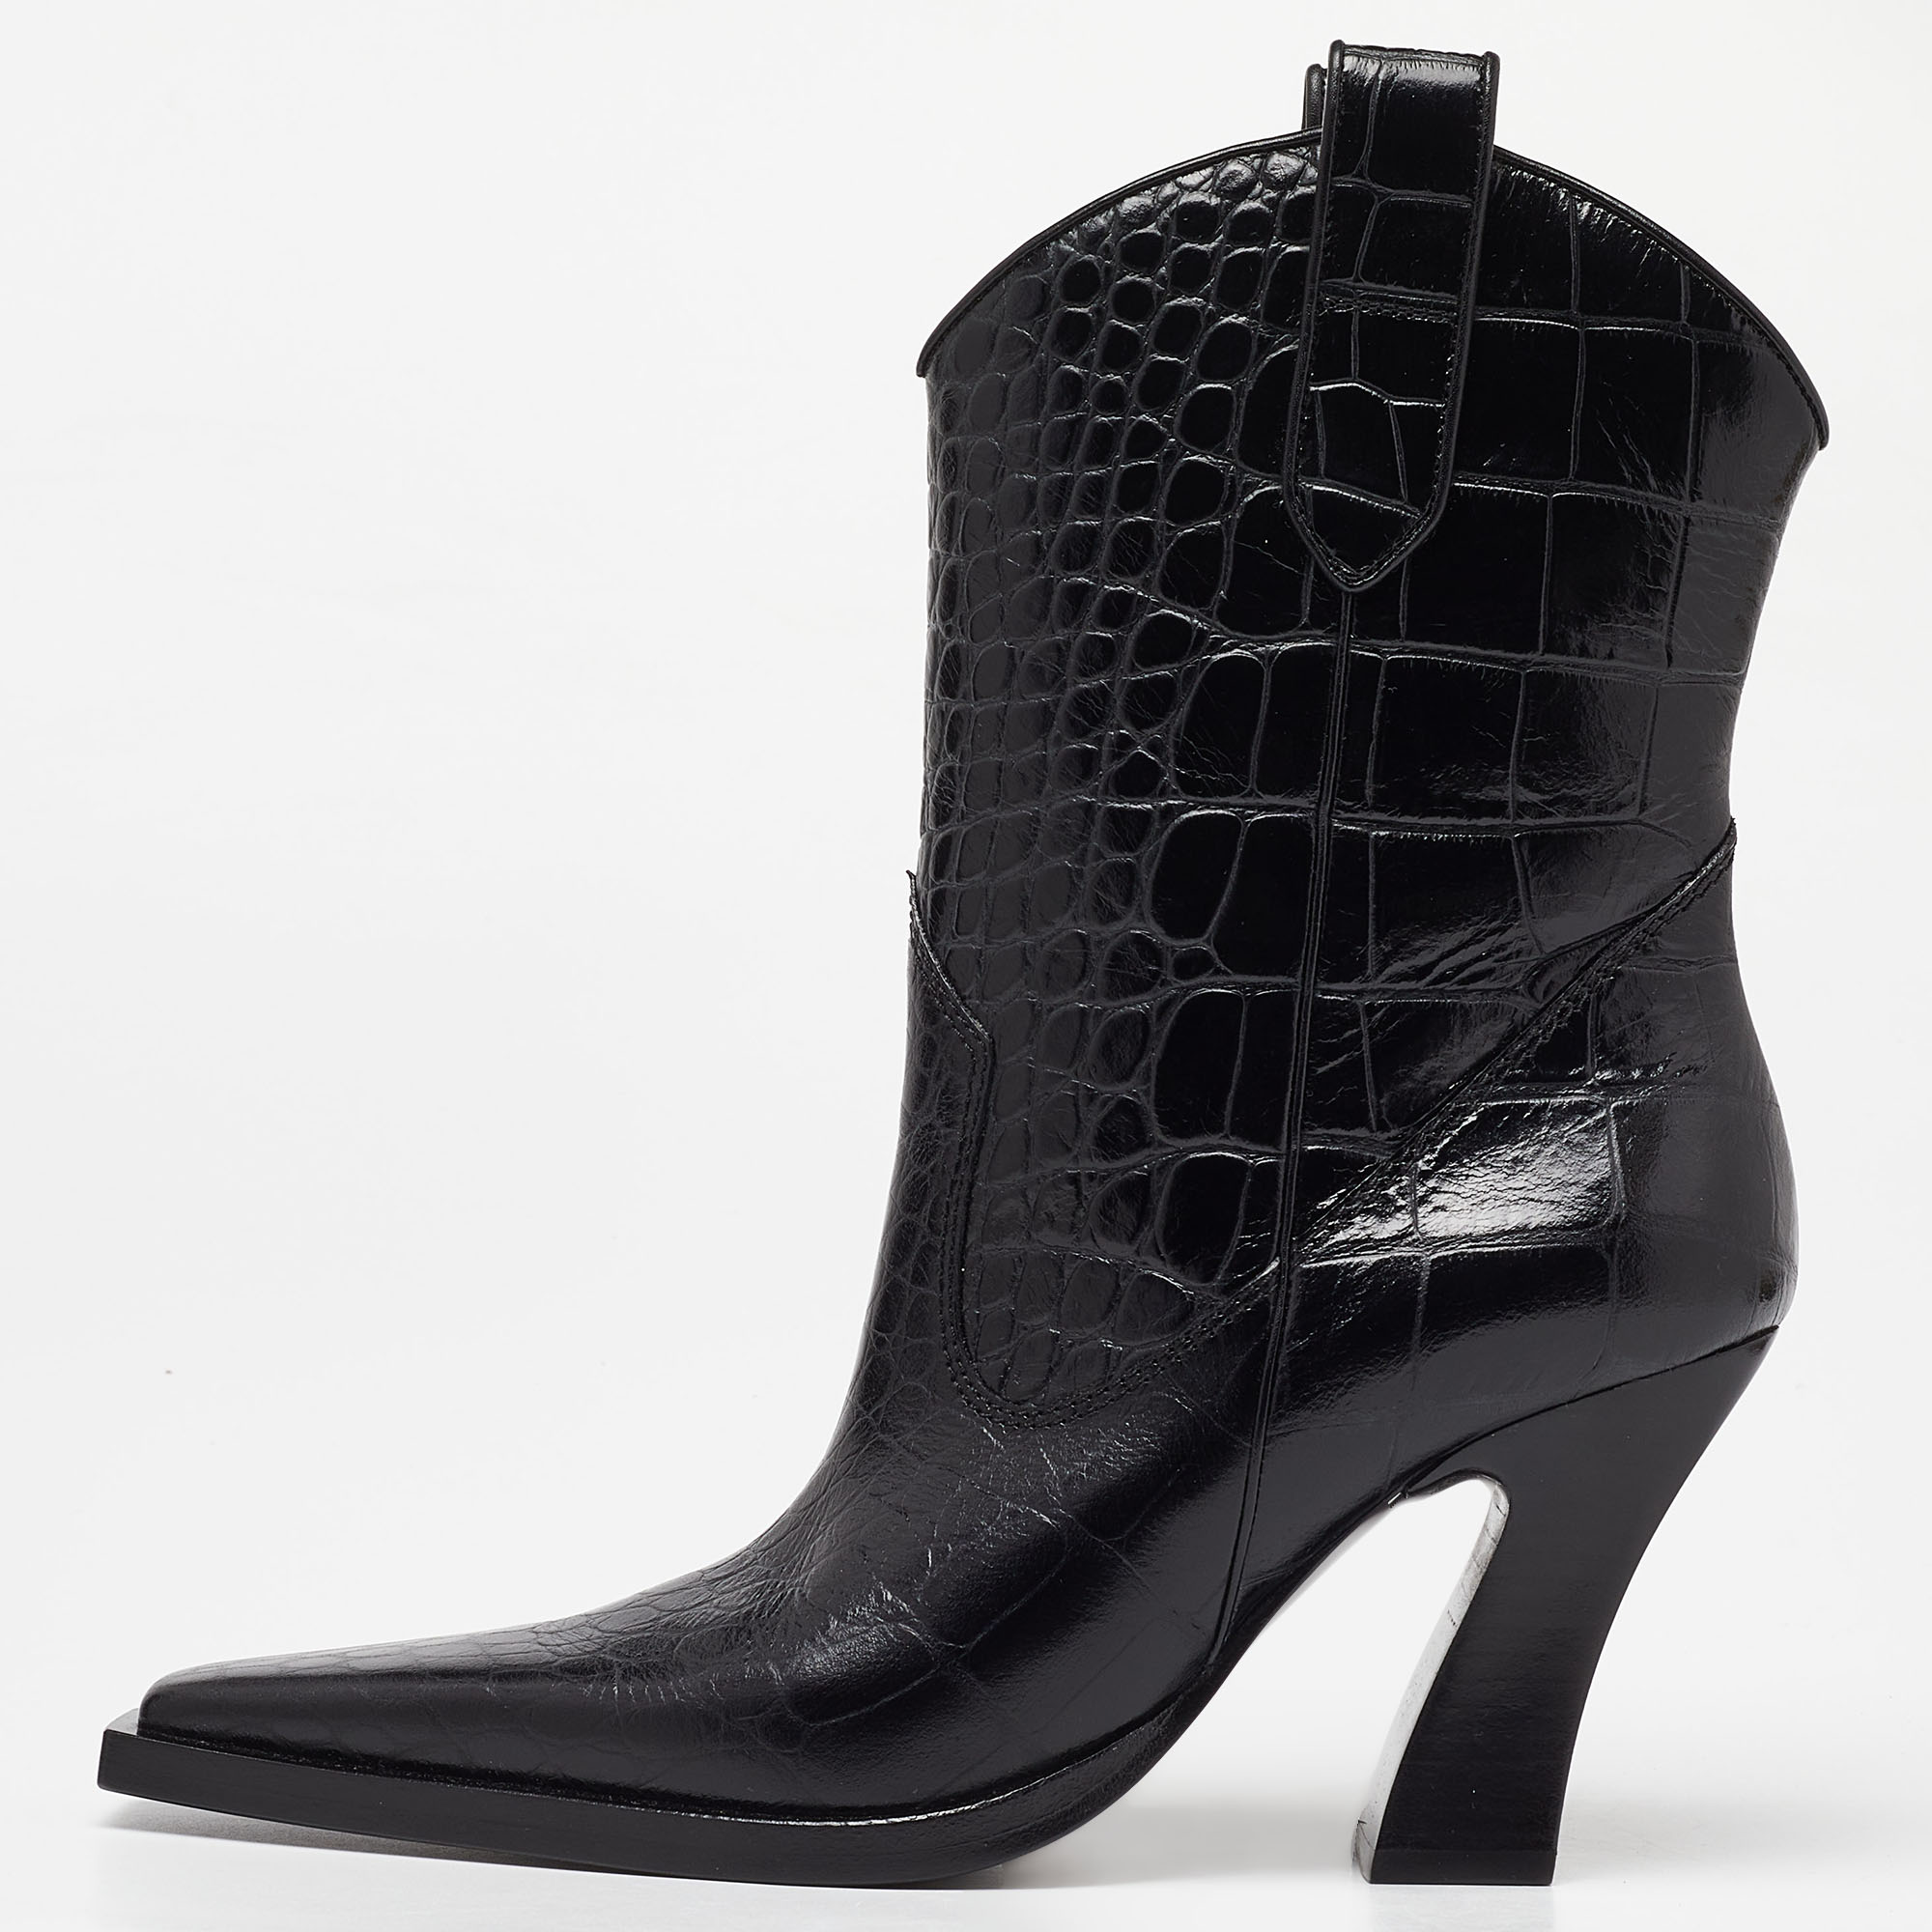 Tom ford black croc embossed leather western ankle boots size 36